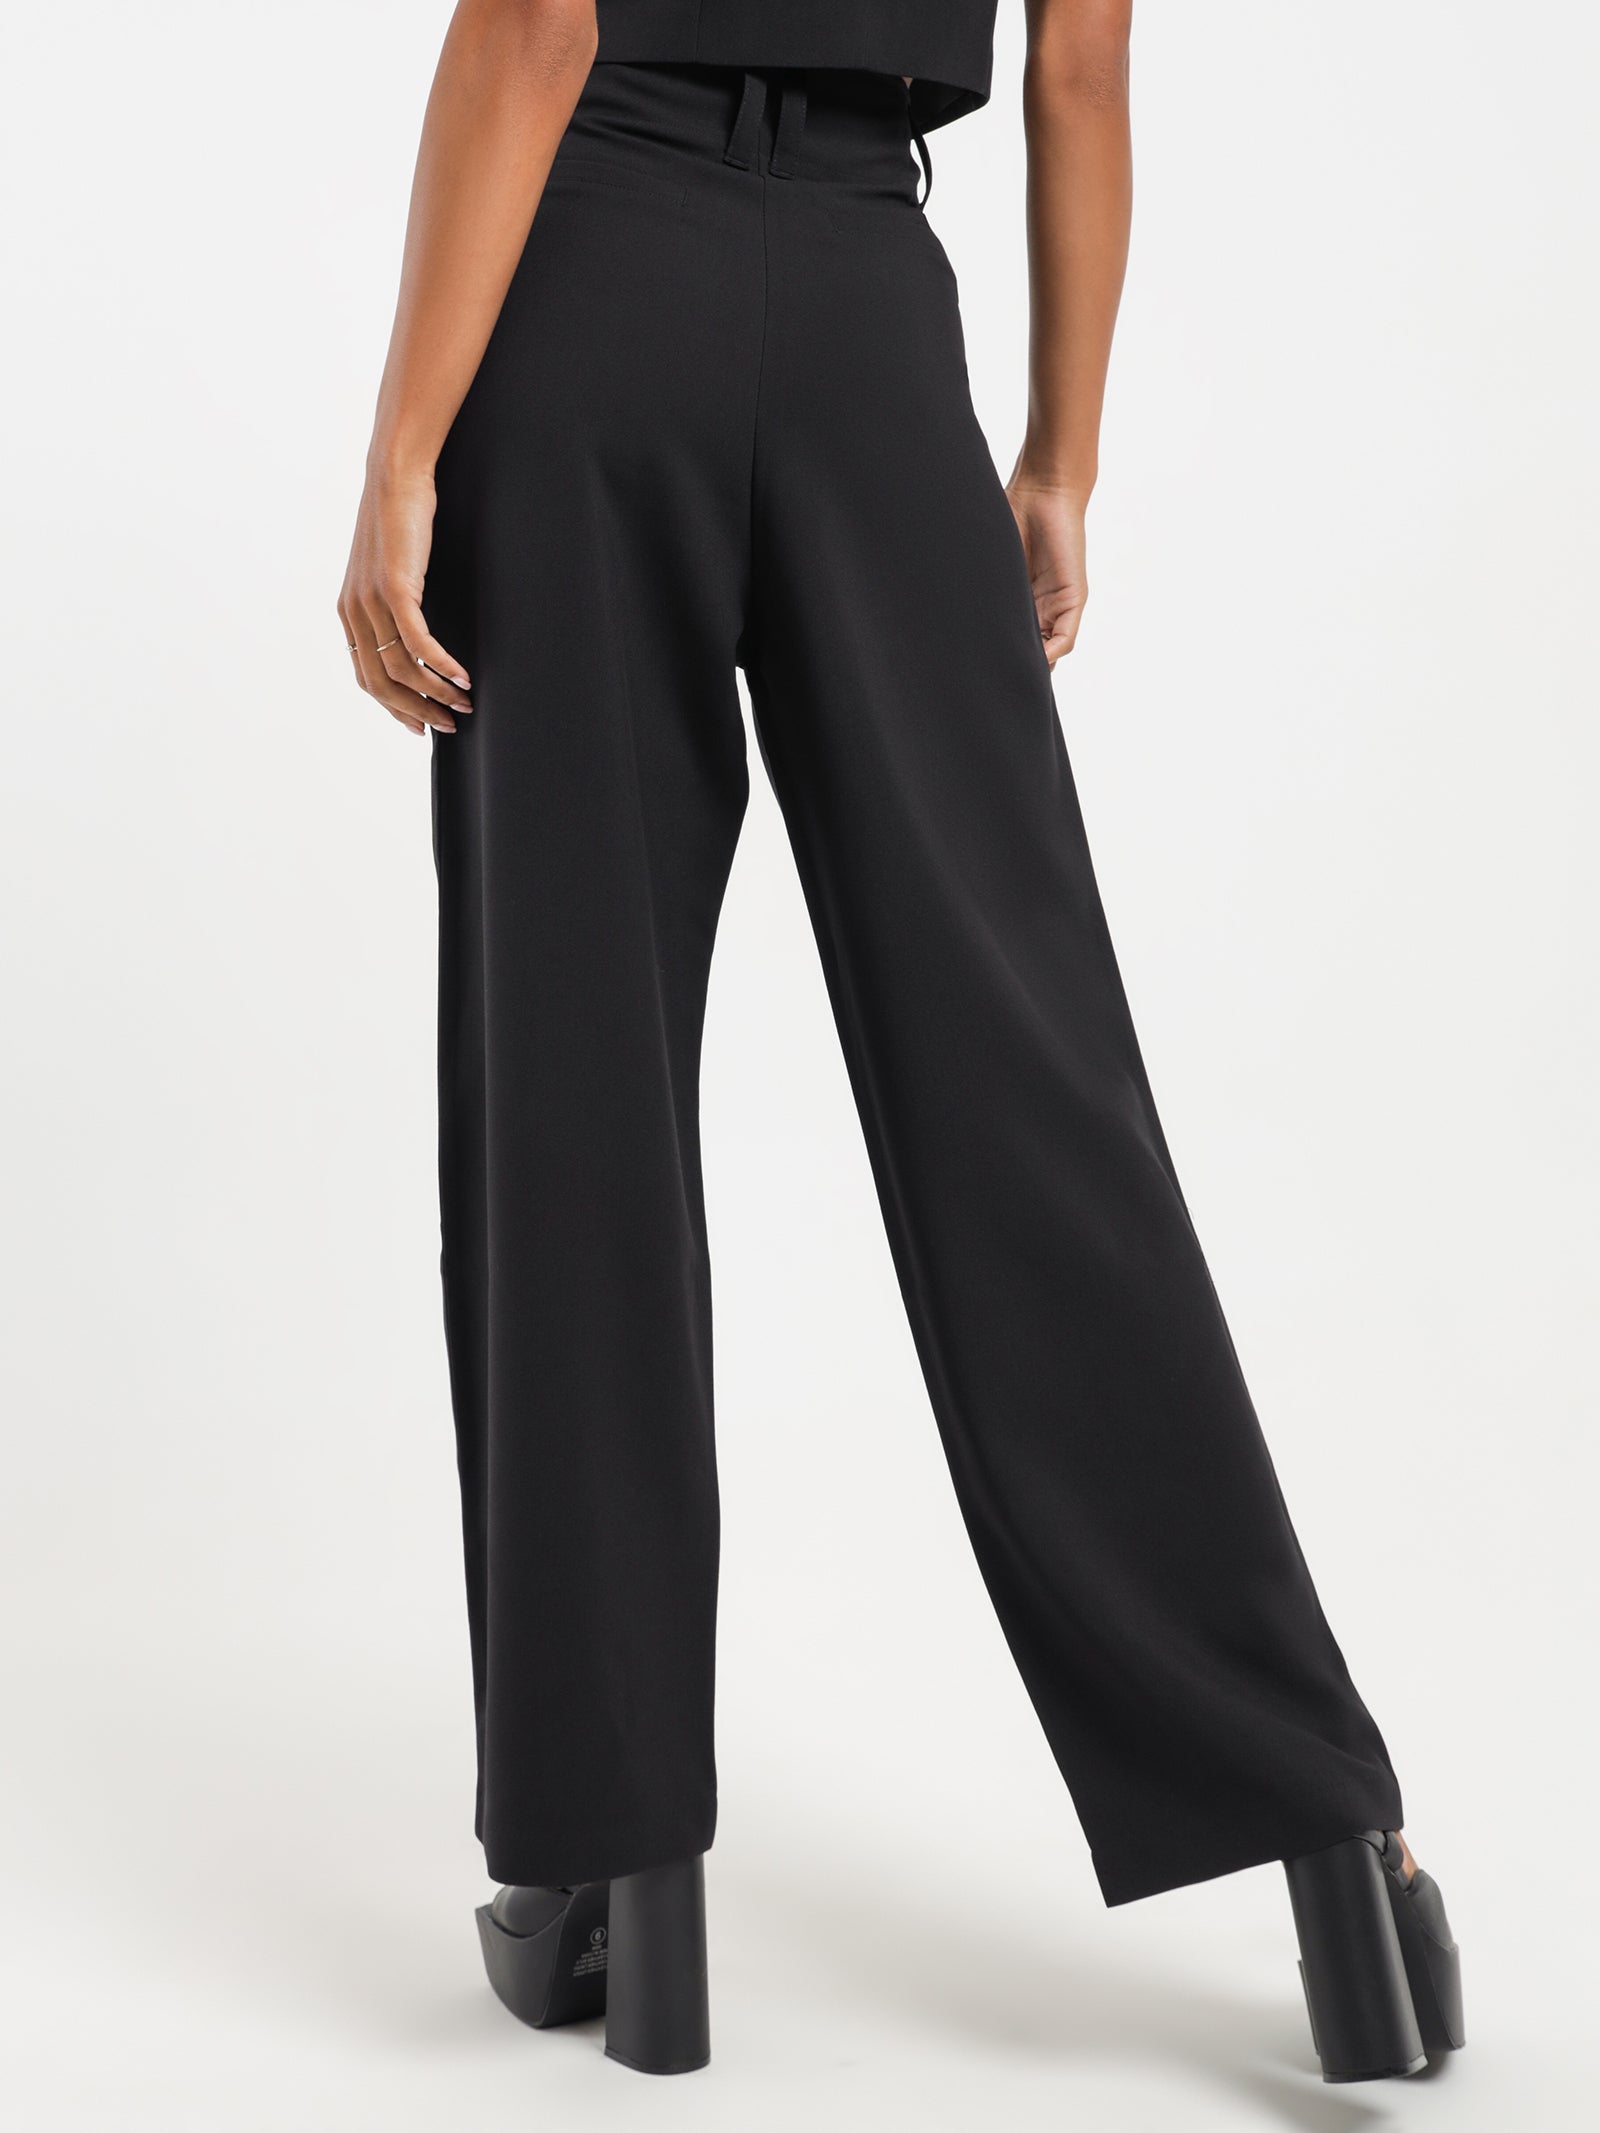 Topshop Tall tailored slim cigarette high-waisted pleat trouser in black |  ASOS